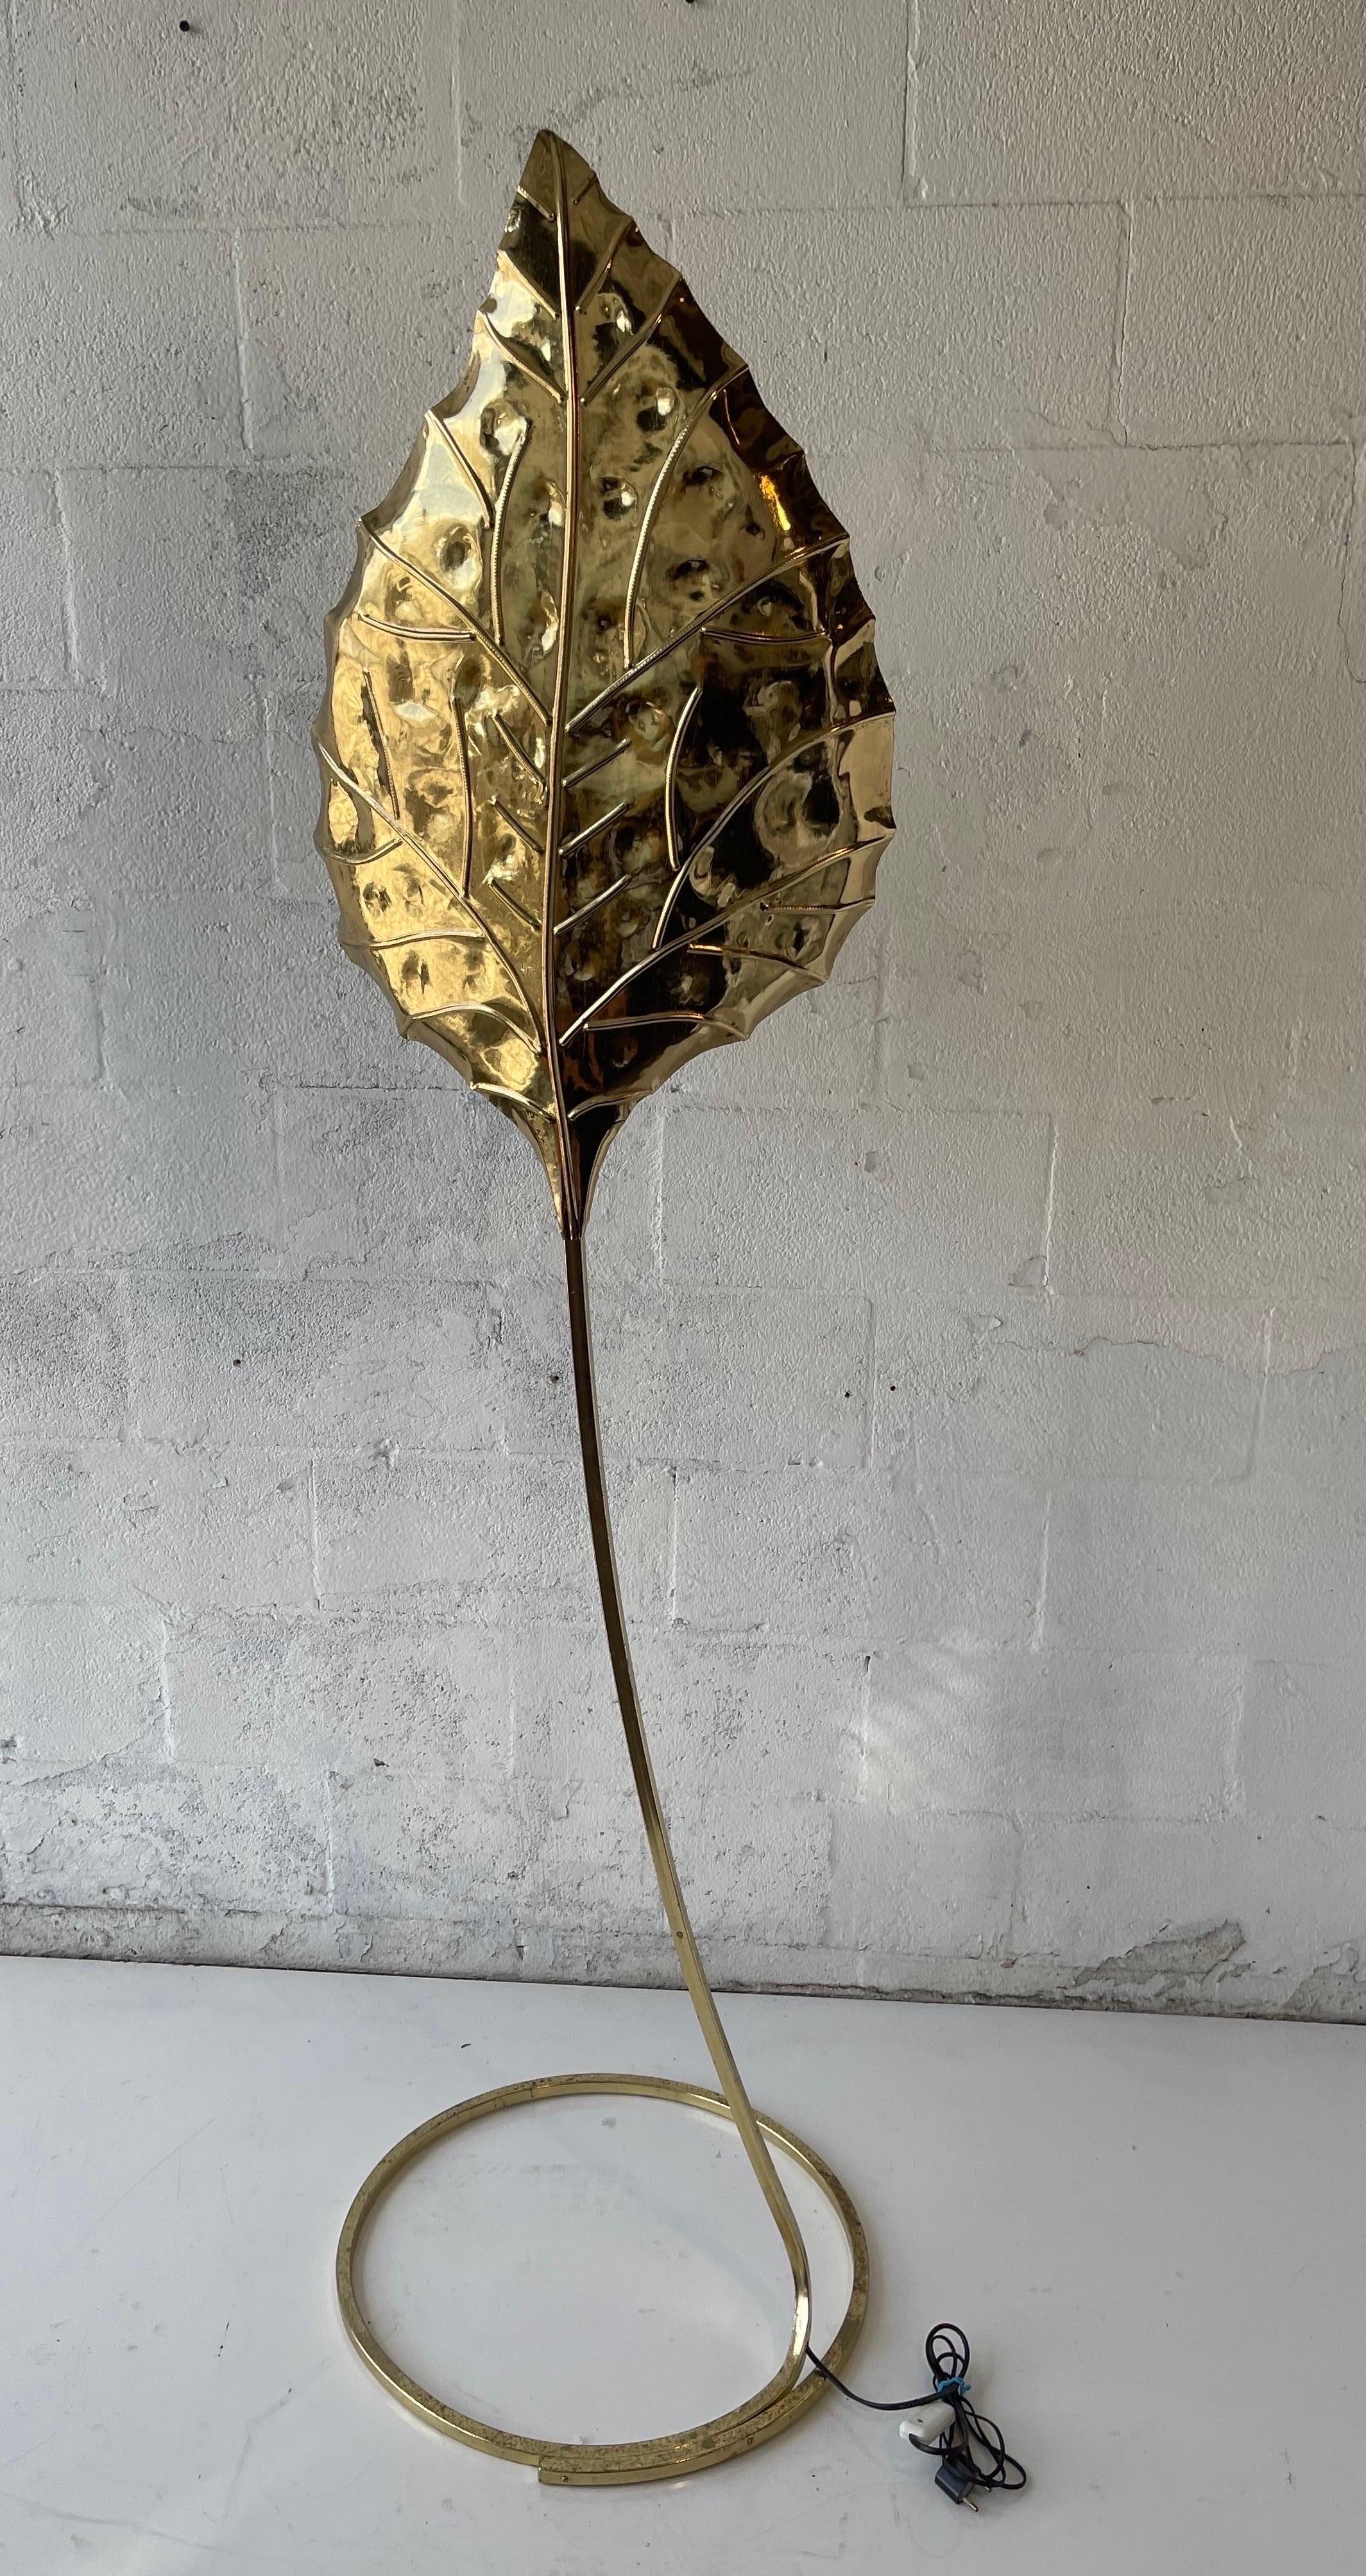 Tommaso Barbi Leaf shaped brass floor lamp, Italy, circa 1970.
One socket, 100 watts bulb max.
US rewired and In working condition.